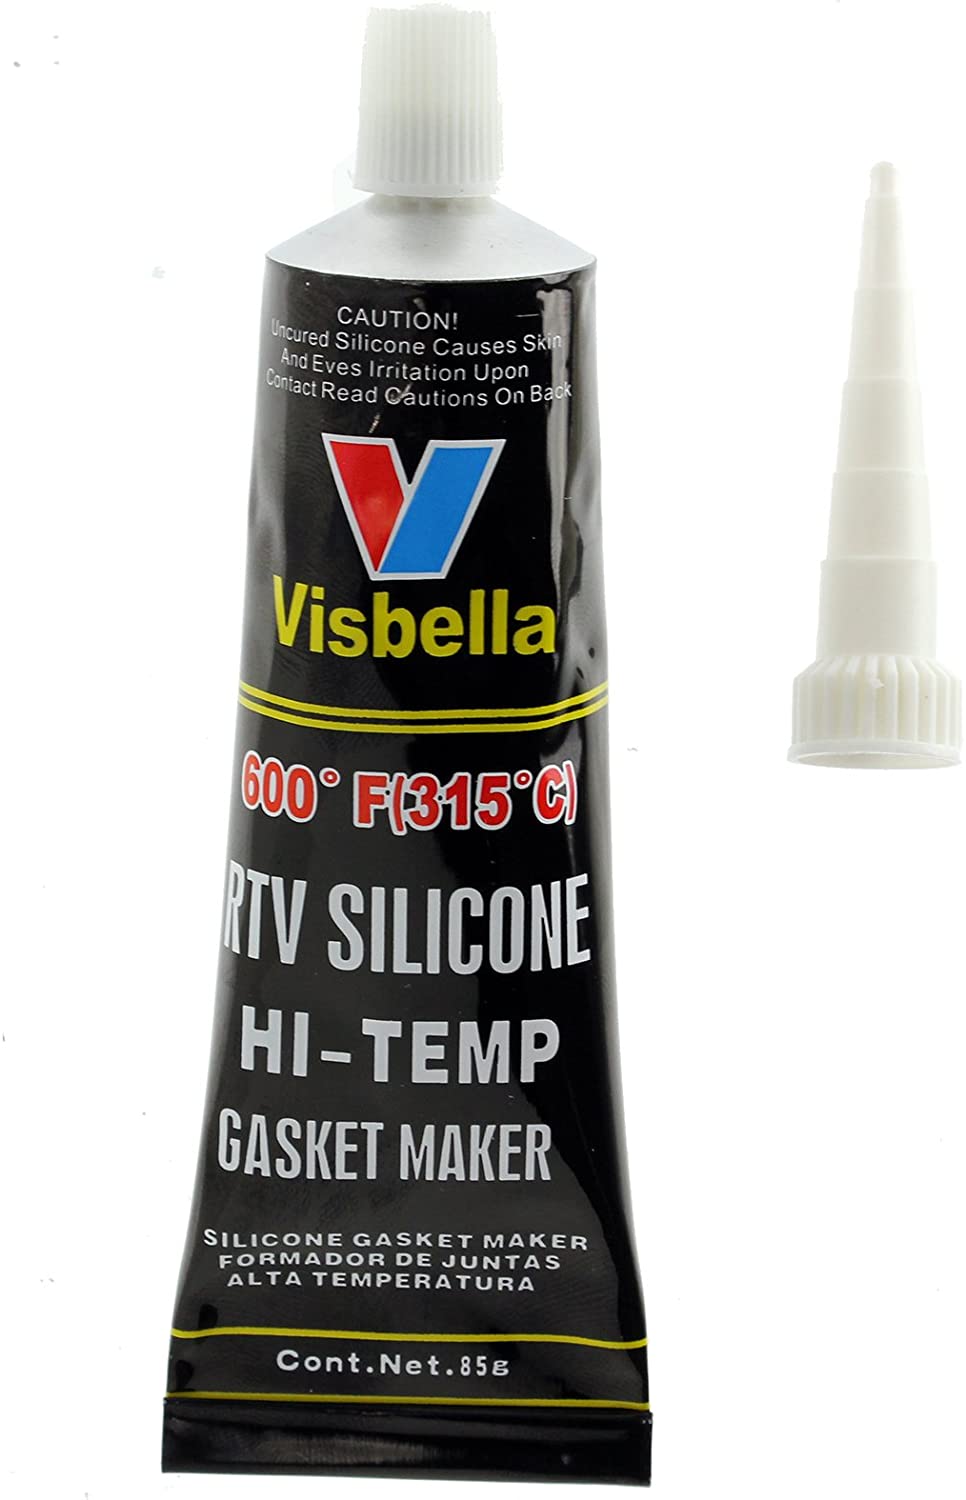 Oven Glass Door Glue Seal High Temp Resistant Silicone -80ºF to 600ºF